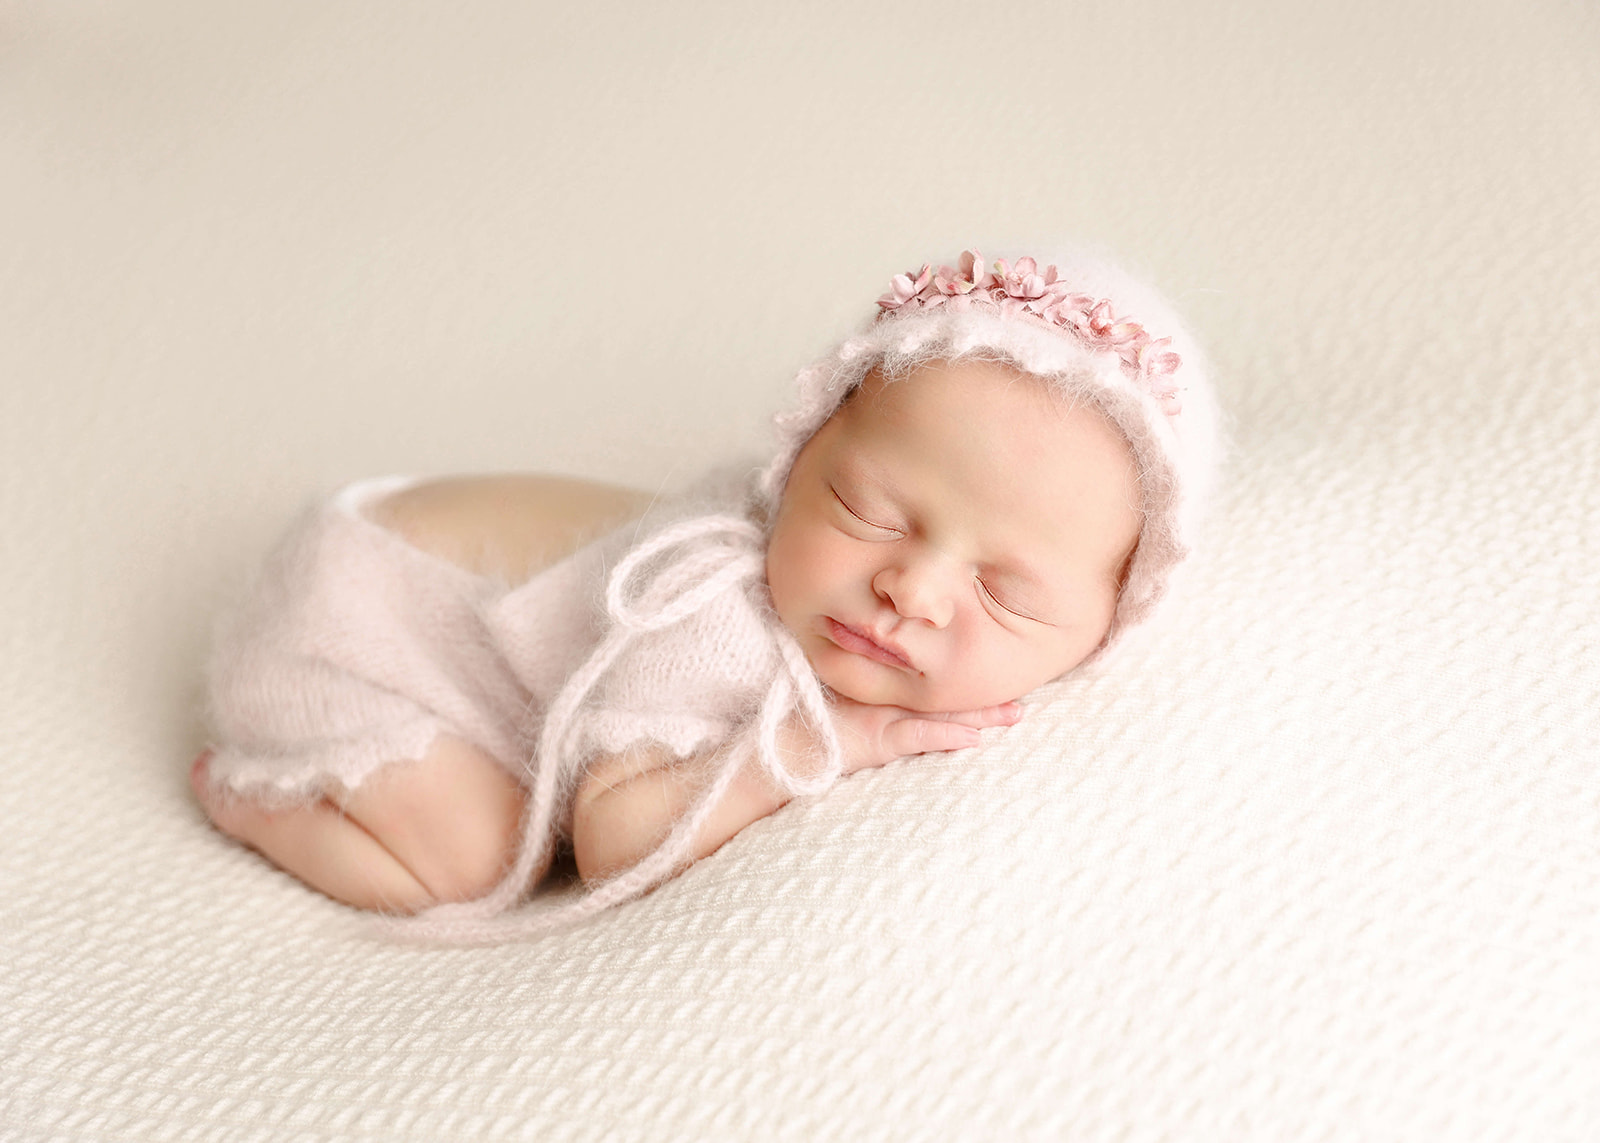 A newborn baby in a knit onesie and hat sleeps on a white cushion in froggy pose